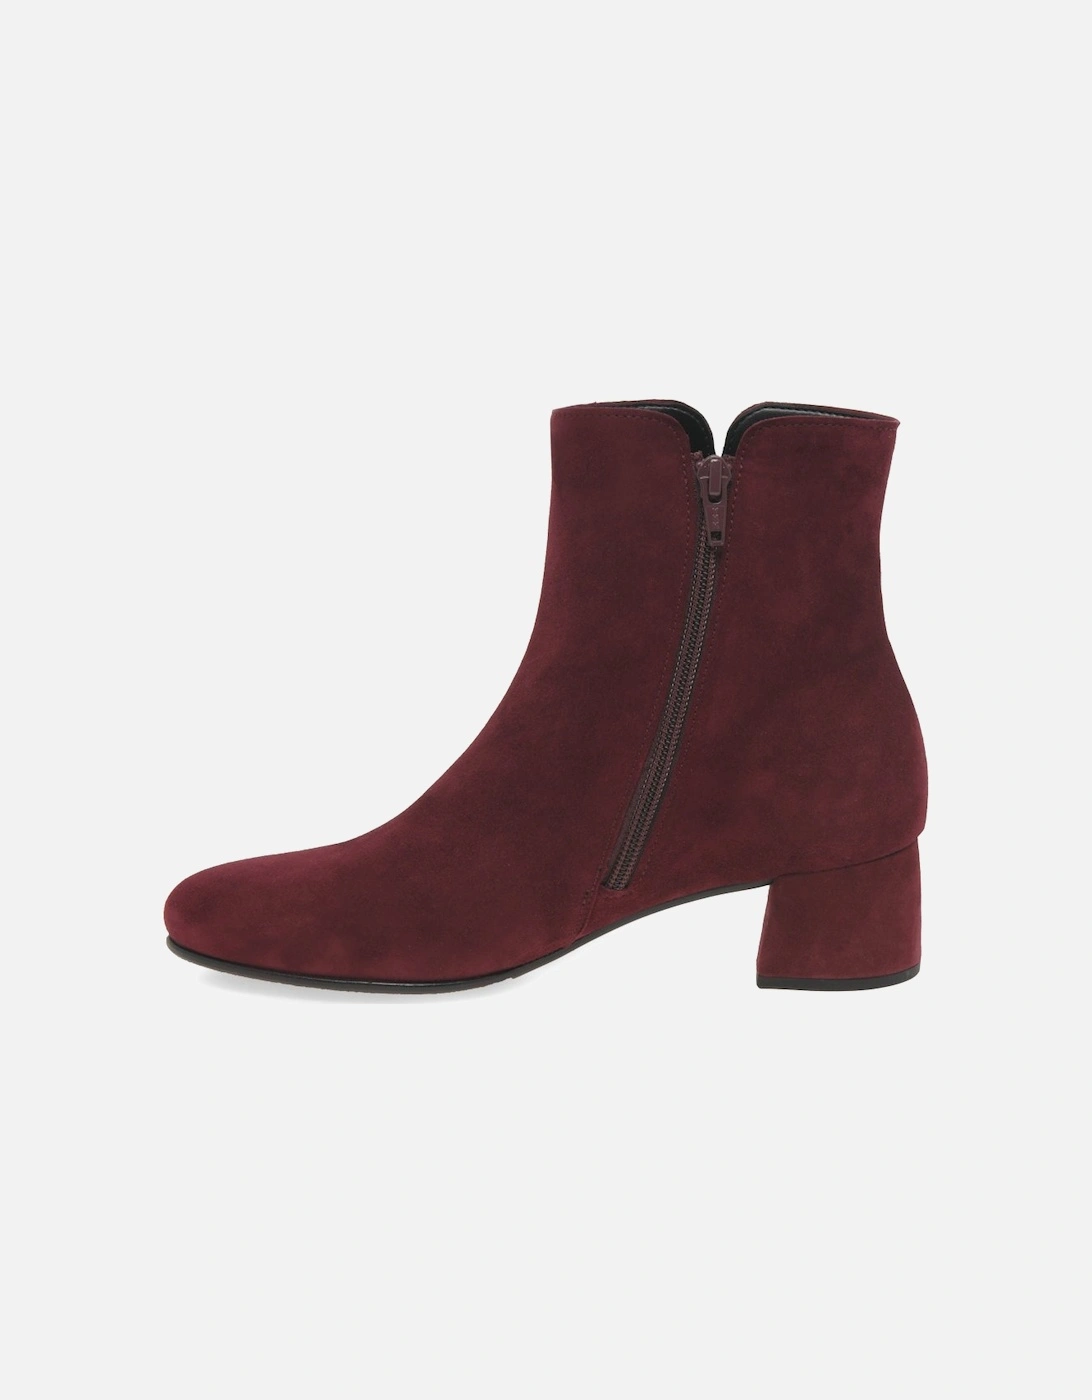 Abbey Womens Ankle Boots